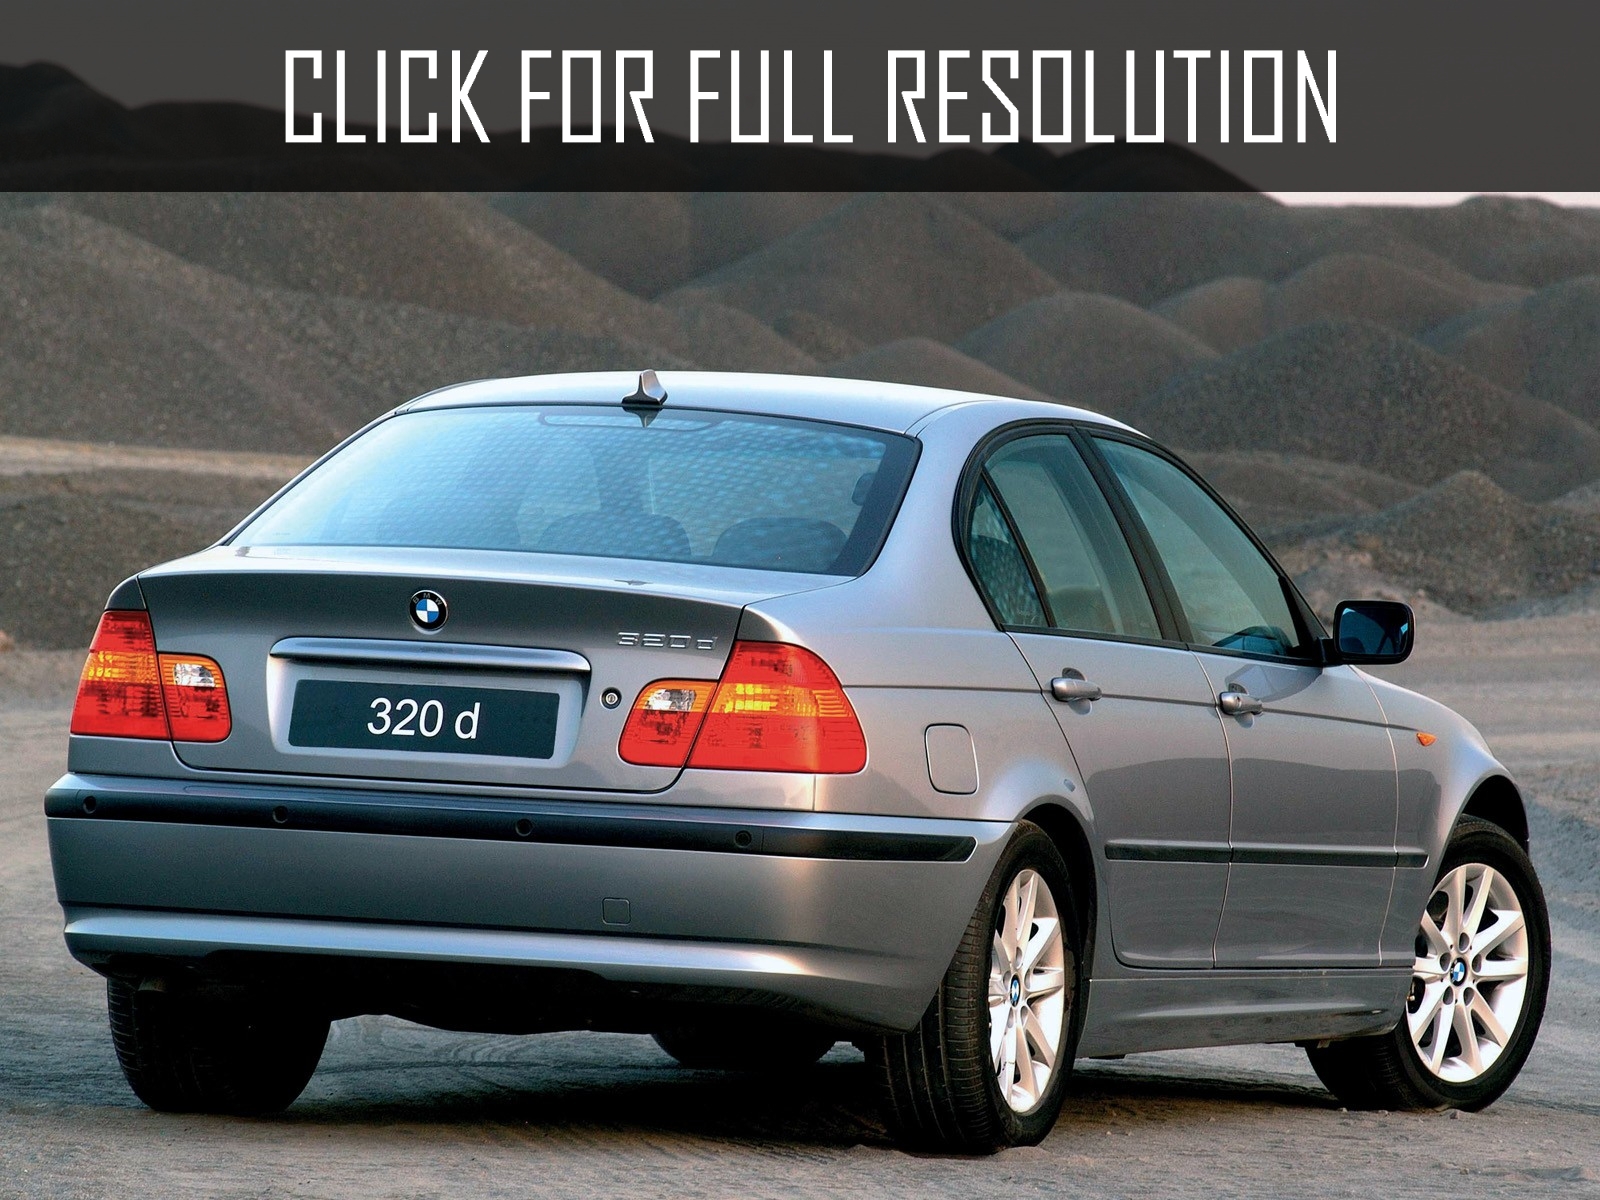 2003 Bmw E46 320d news, reviews, msrp, ratings with